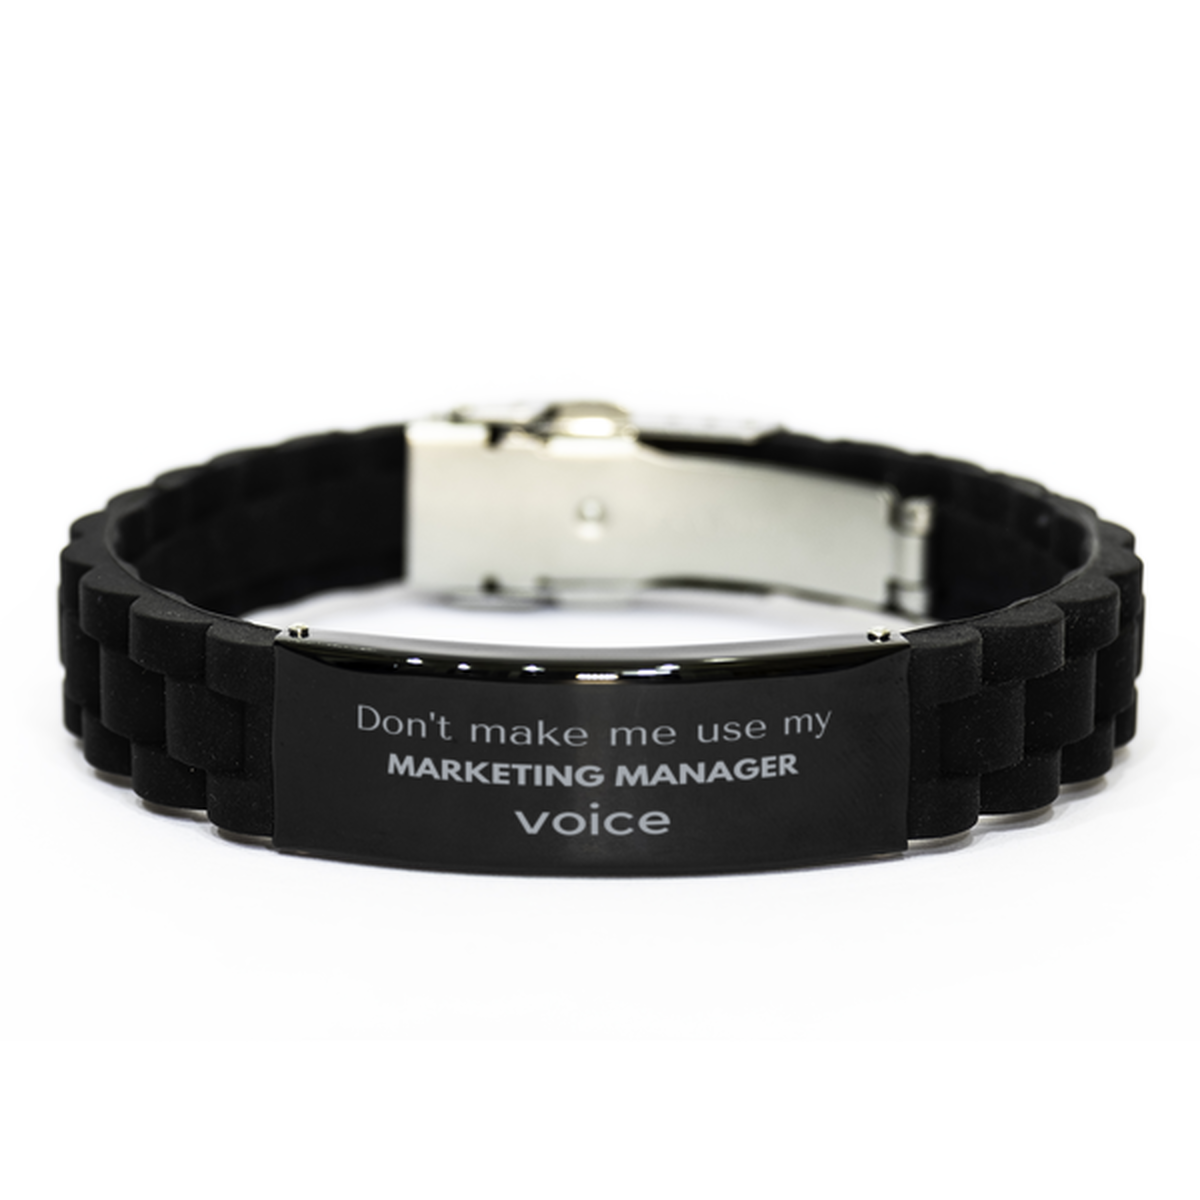 Don't make me use my Marketing Manager voice, Sarcasm Marketing Manager Gifts, Christmas Marketing Manager Black Glidelock Clasp Bracelet Birthday Unique Gifts For Marketing Manager Coworkers, Men, Women, Colleague, Friends